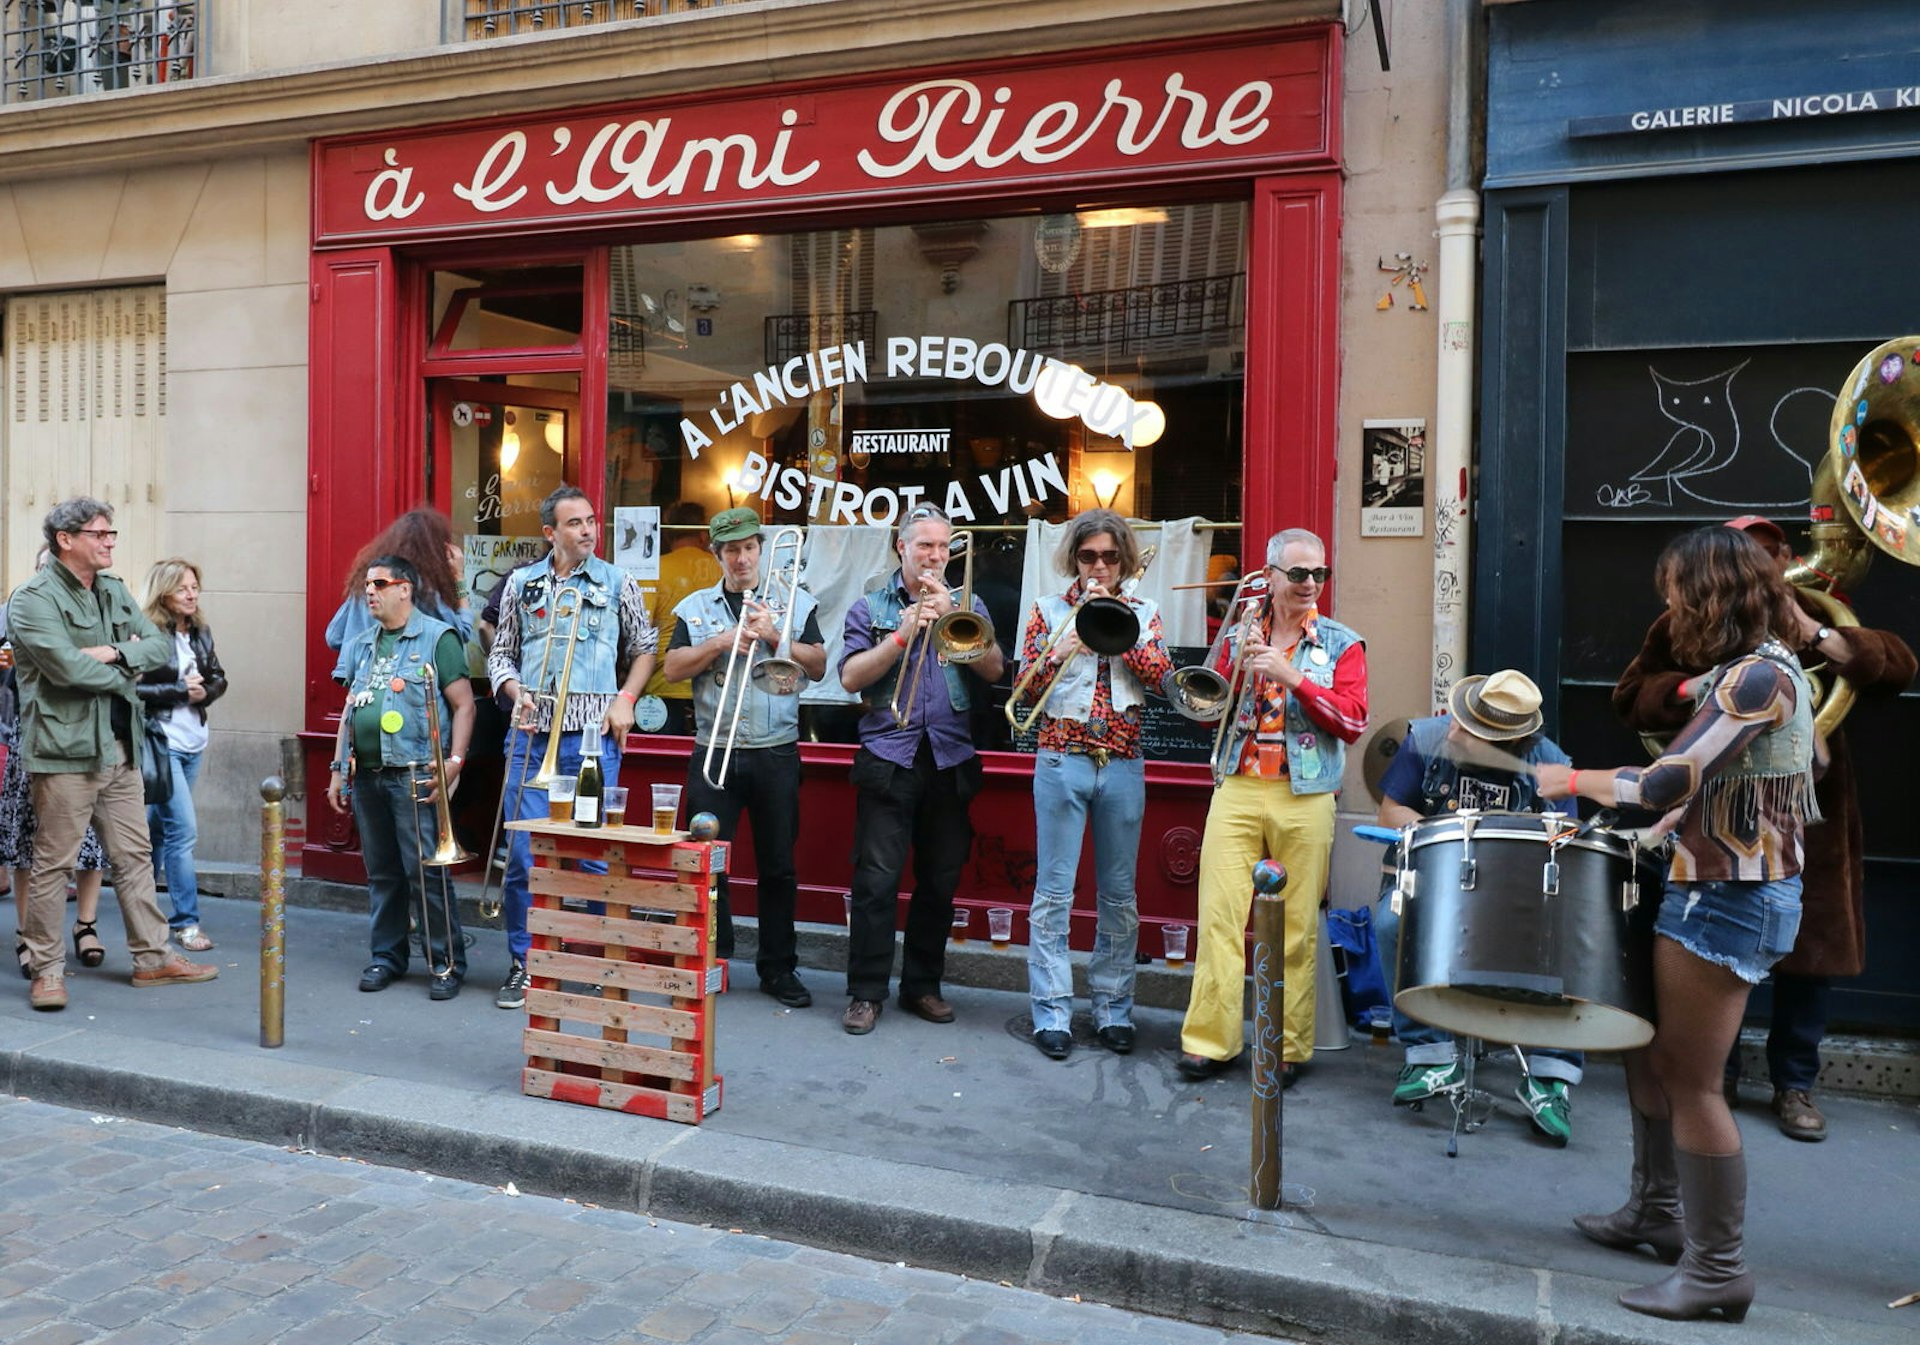 A jazz band, brightly attired in loud shirts and denim, play on the pavement in paris. An upturned shipping pallet is used as a makeshift table, holding glasses of beer and a bottle of wine © Catherine Le Nevez / Lonely Planet